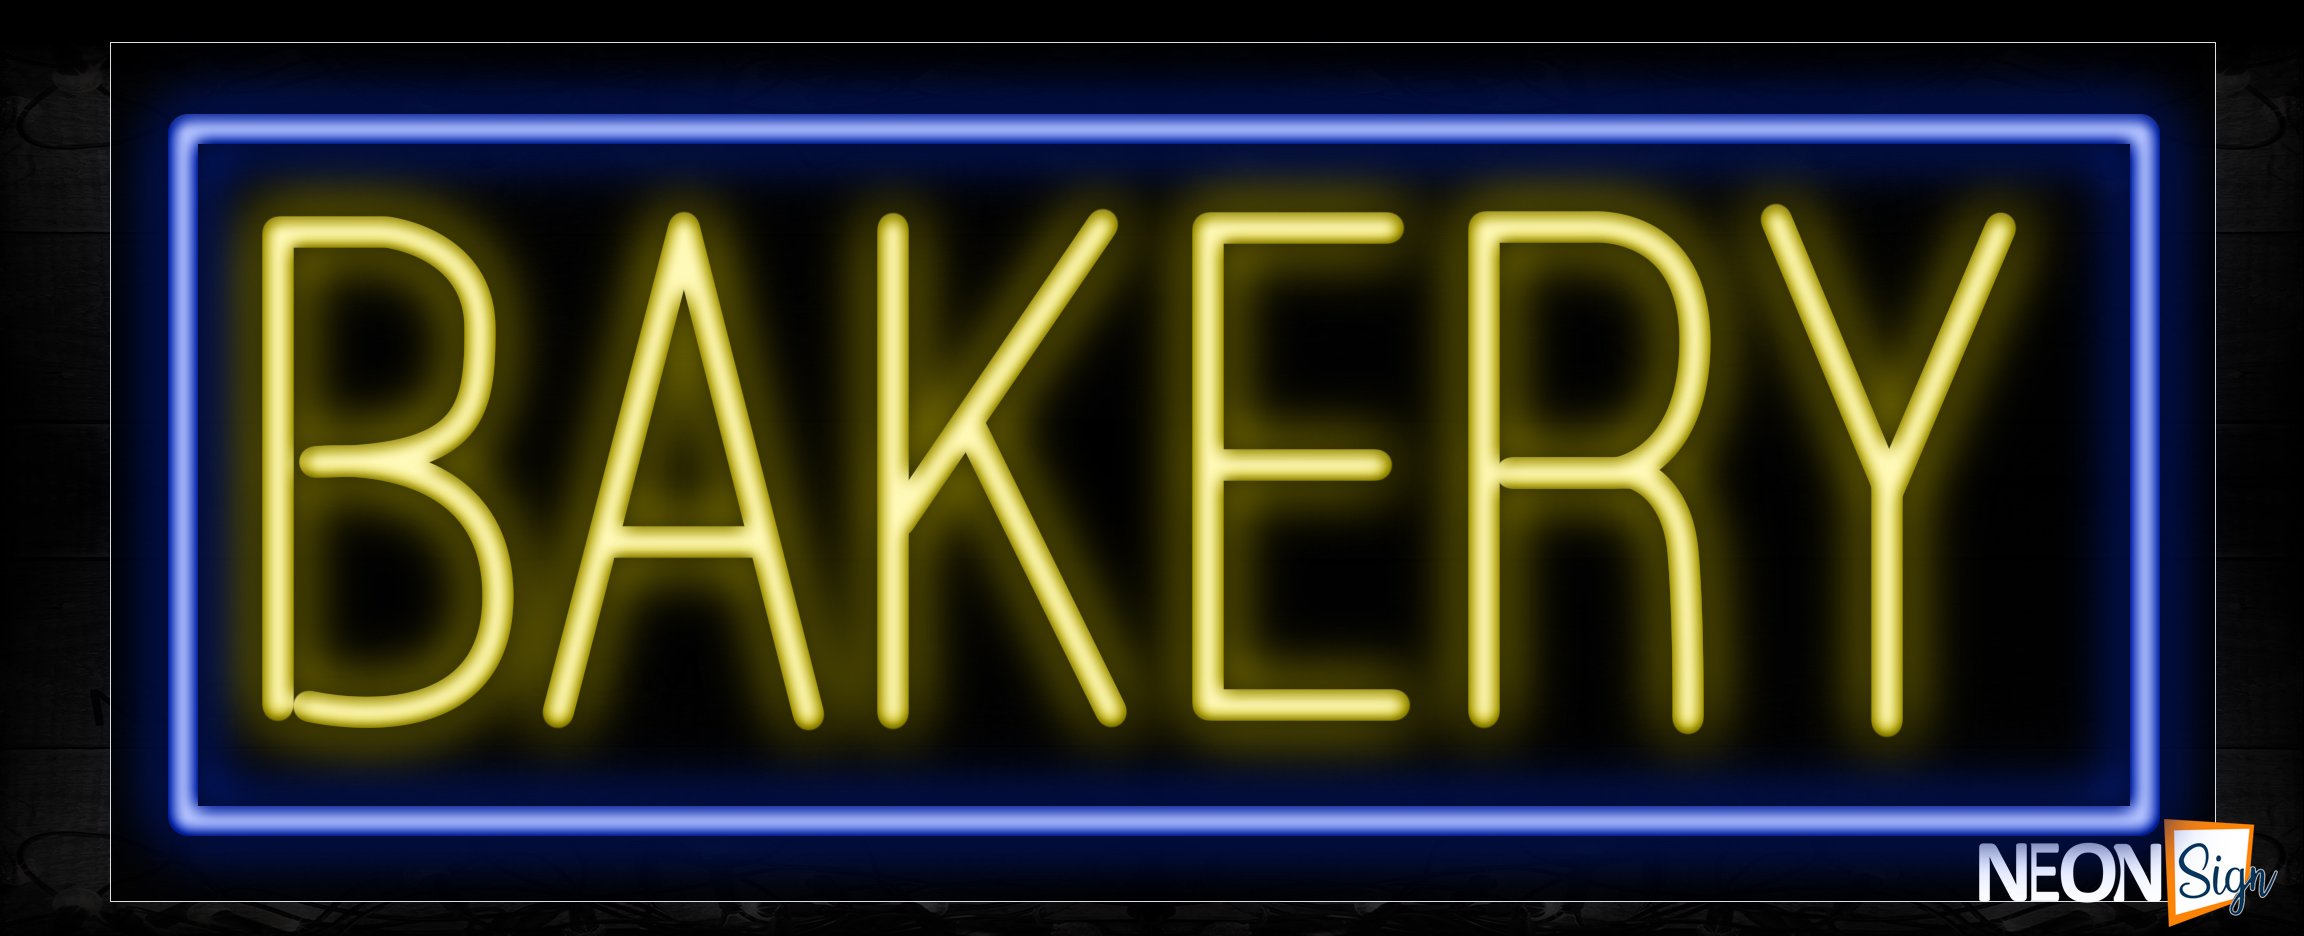 Image of 10179 Bakery in yellow with blue border Neon Sign_13x32 Black Backing